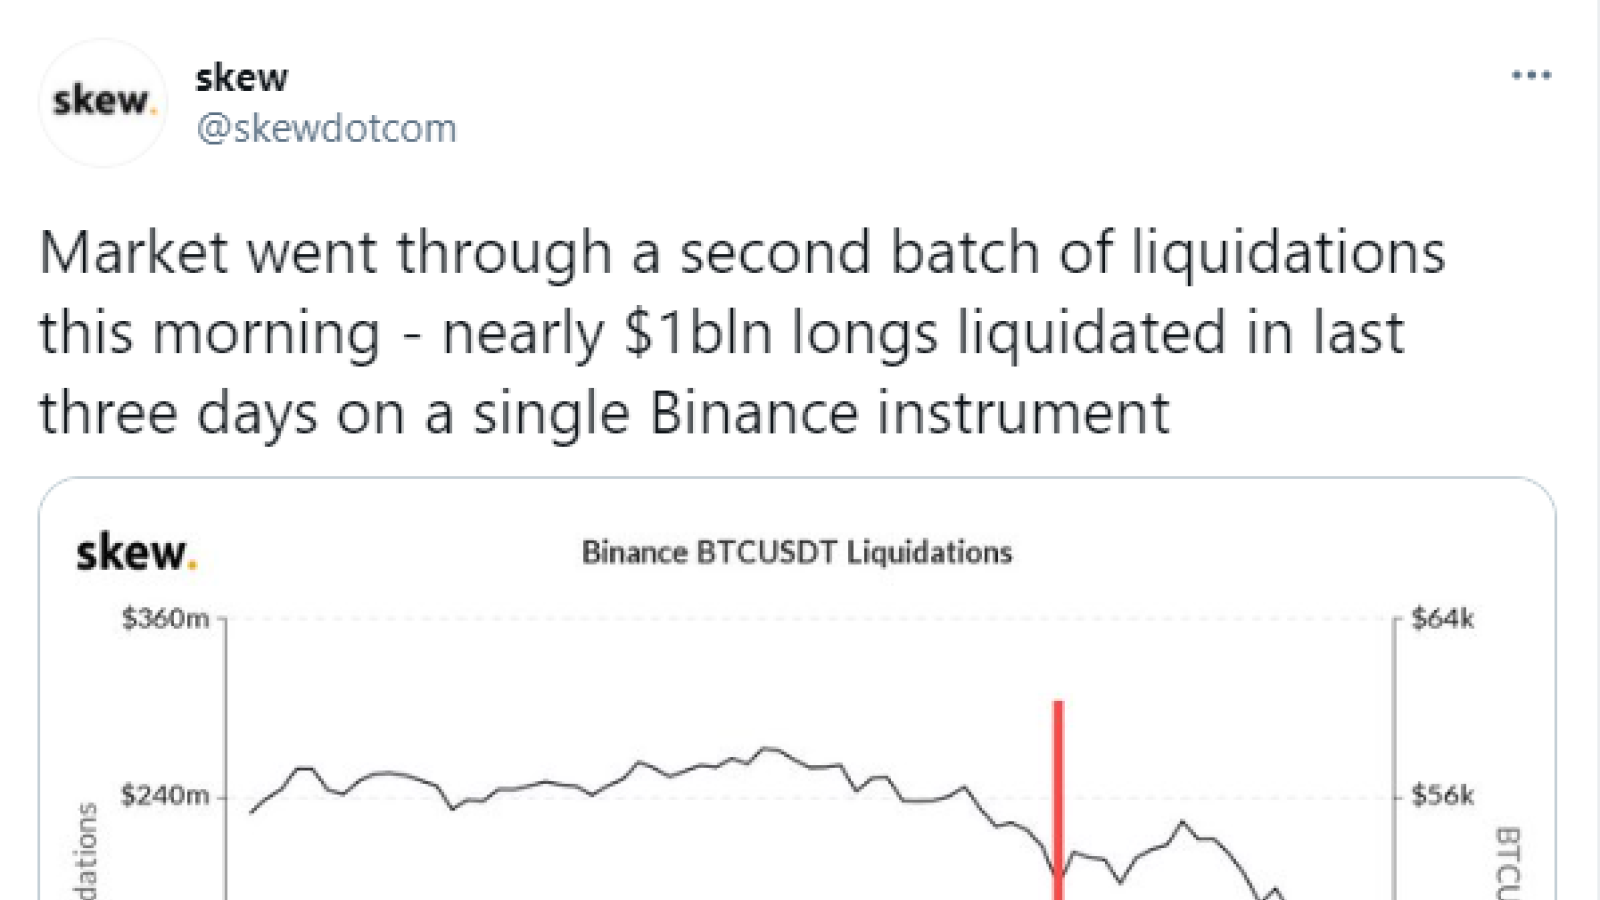 Binance sees $1bln in Bitcoin (BTC) long positions liquidated